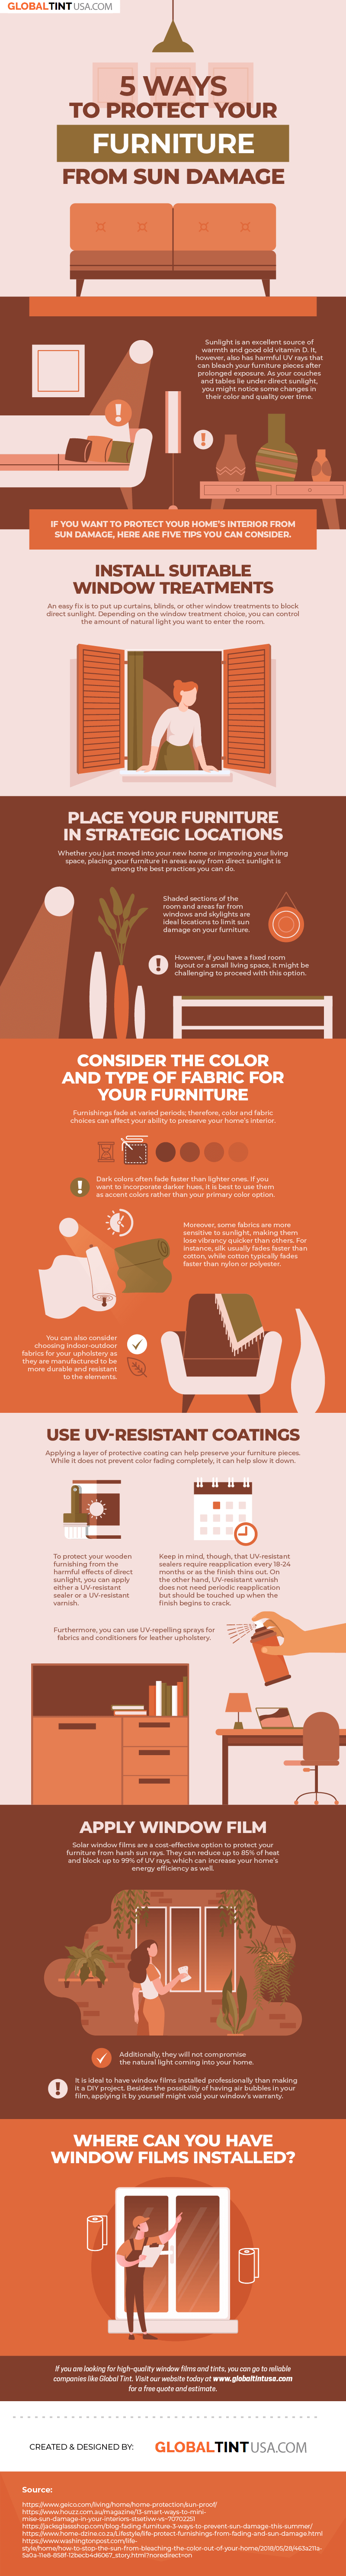 Ways to Protect Your Furniture from Sun Damage